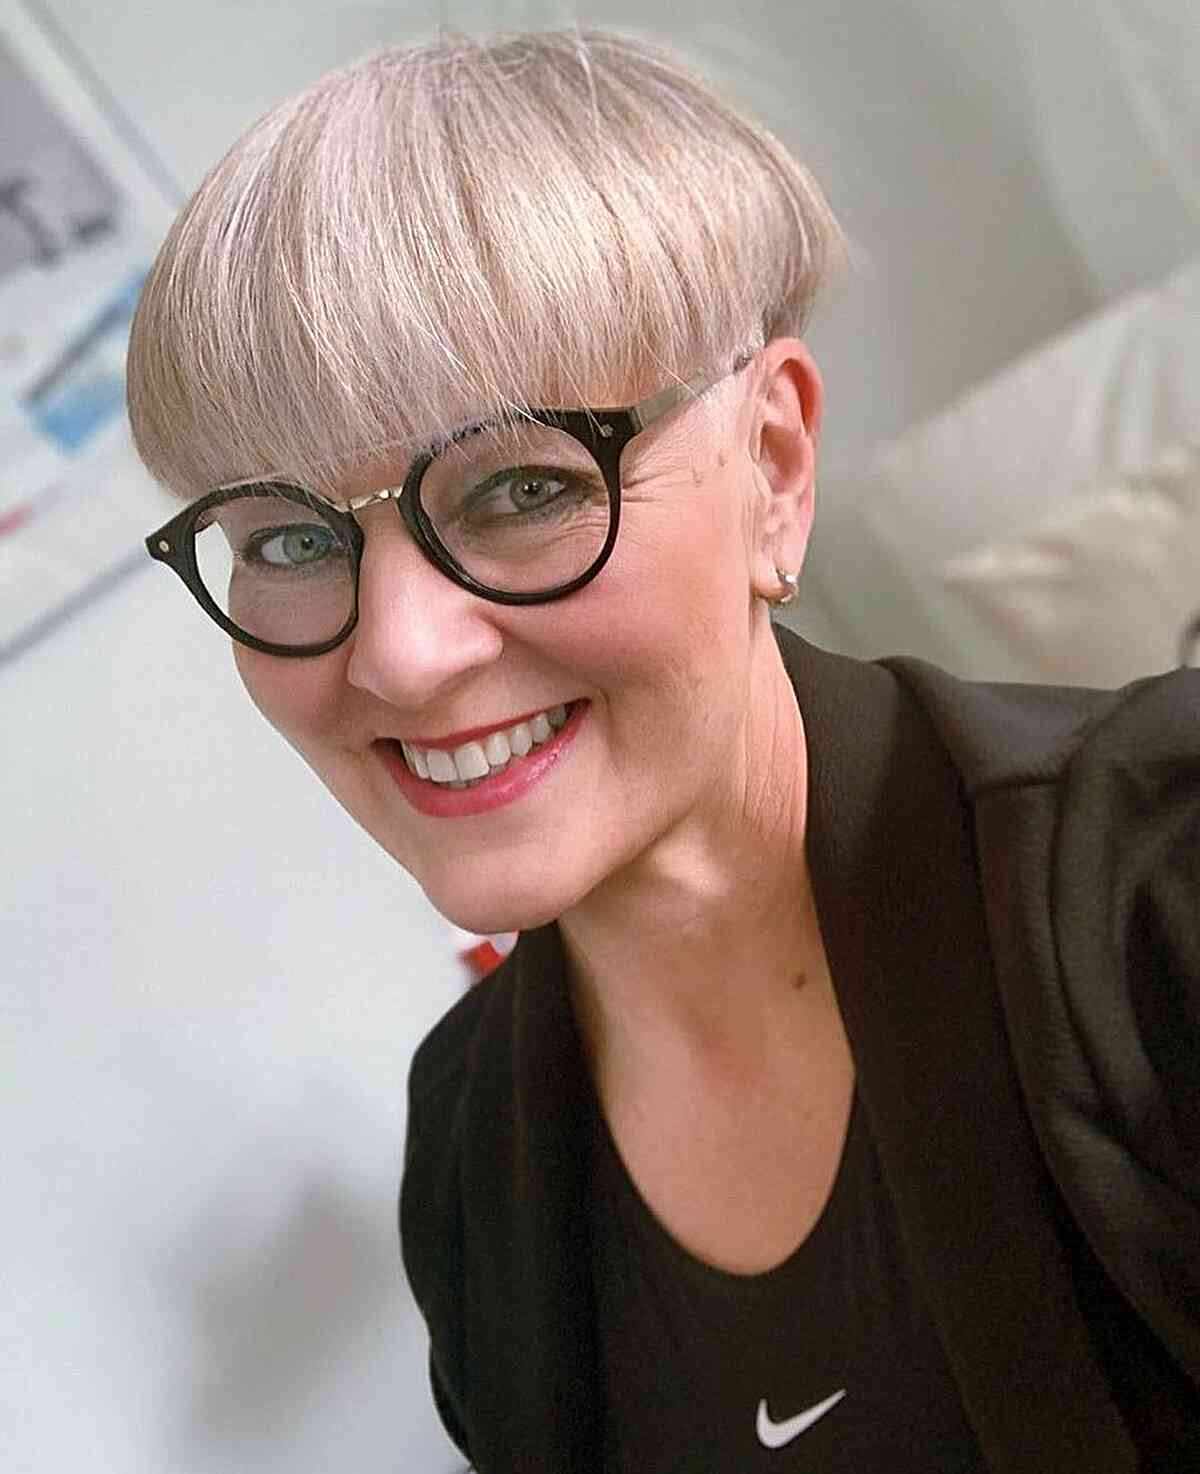 Straight Bowl Cut for Mature Women Over 50 Wearing Eyeglasses